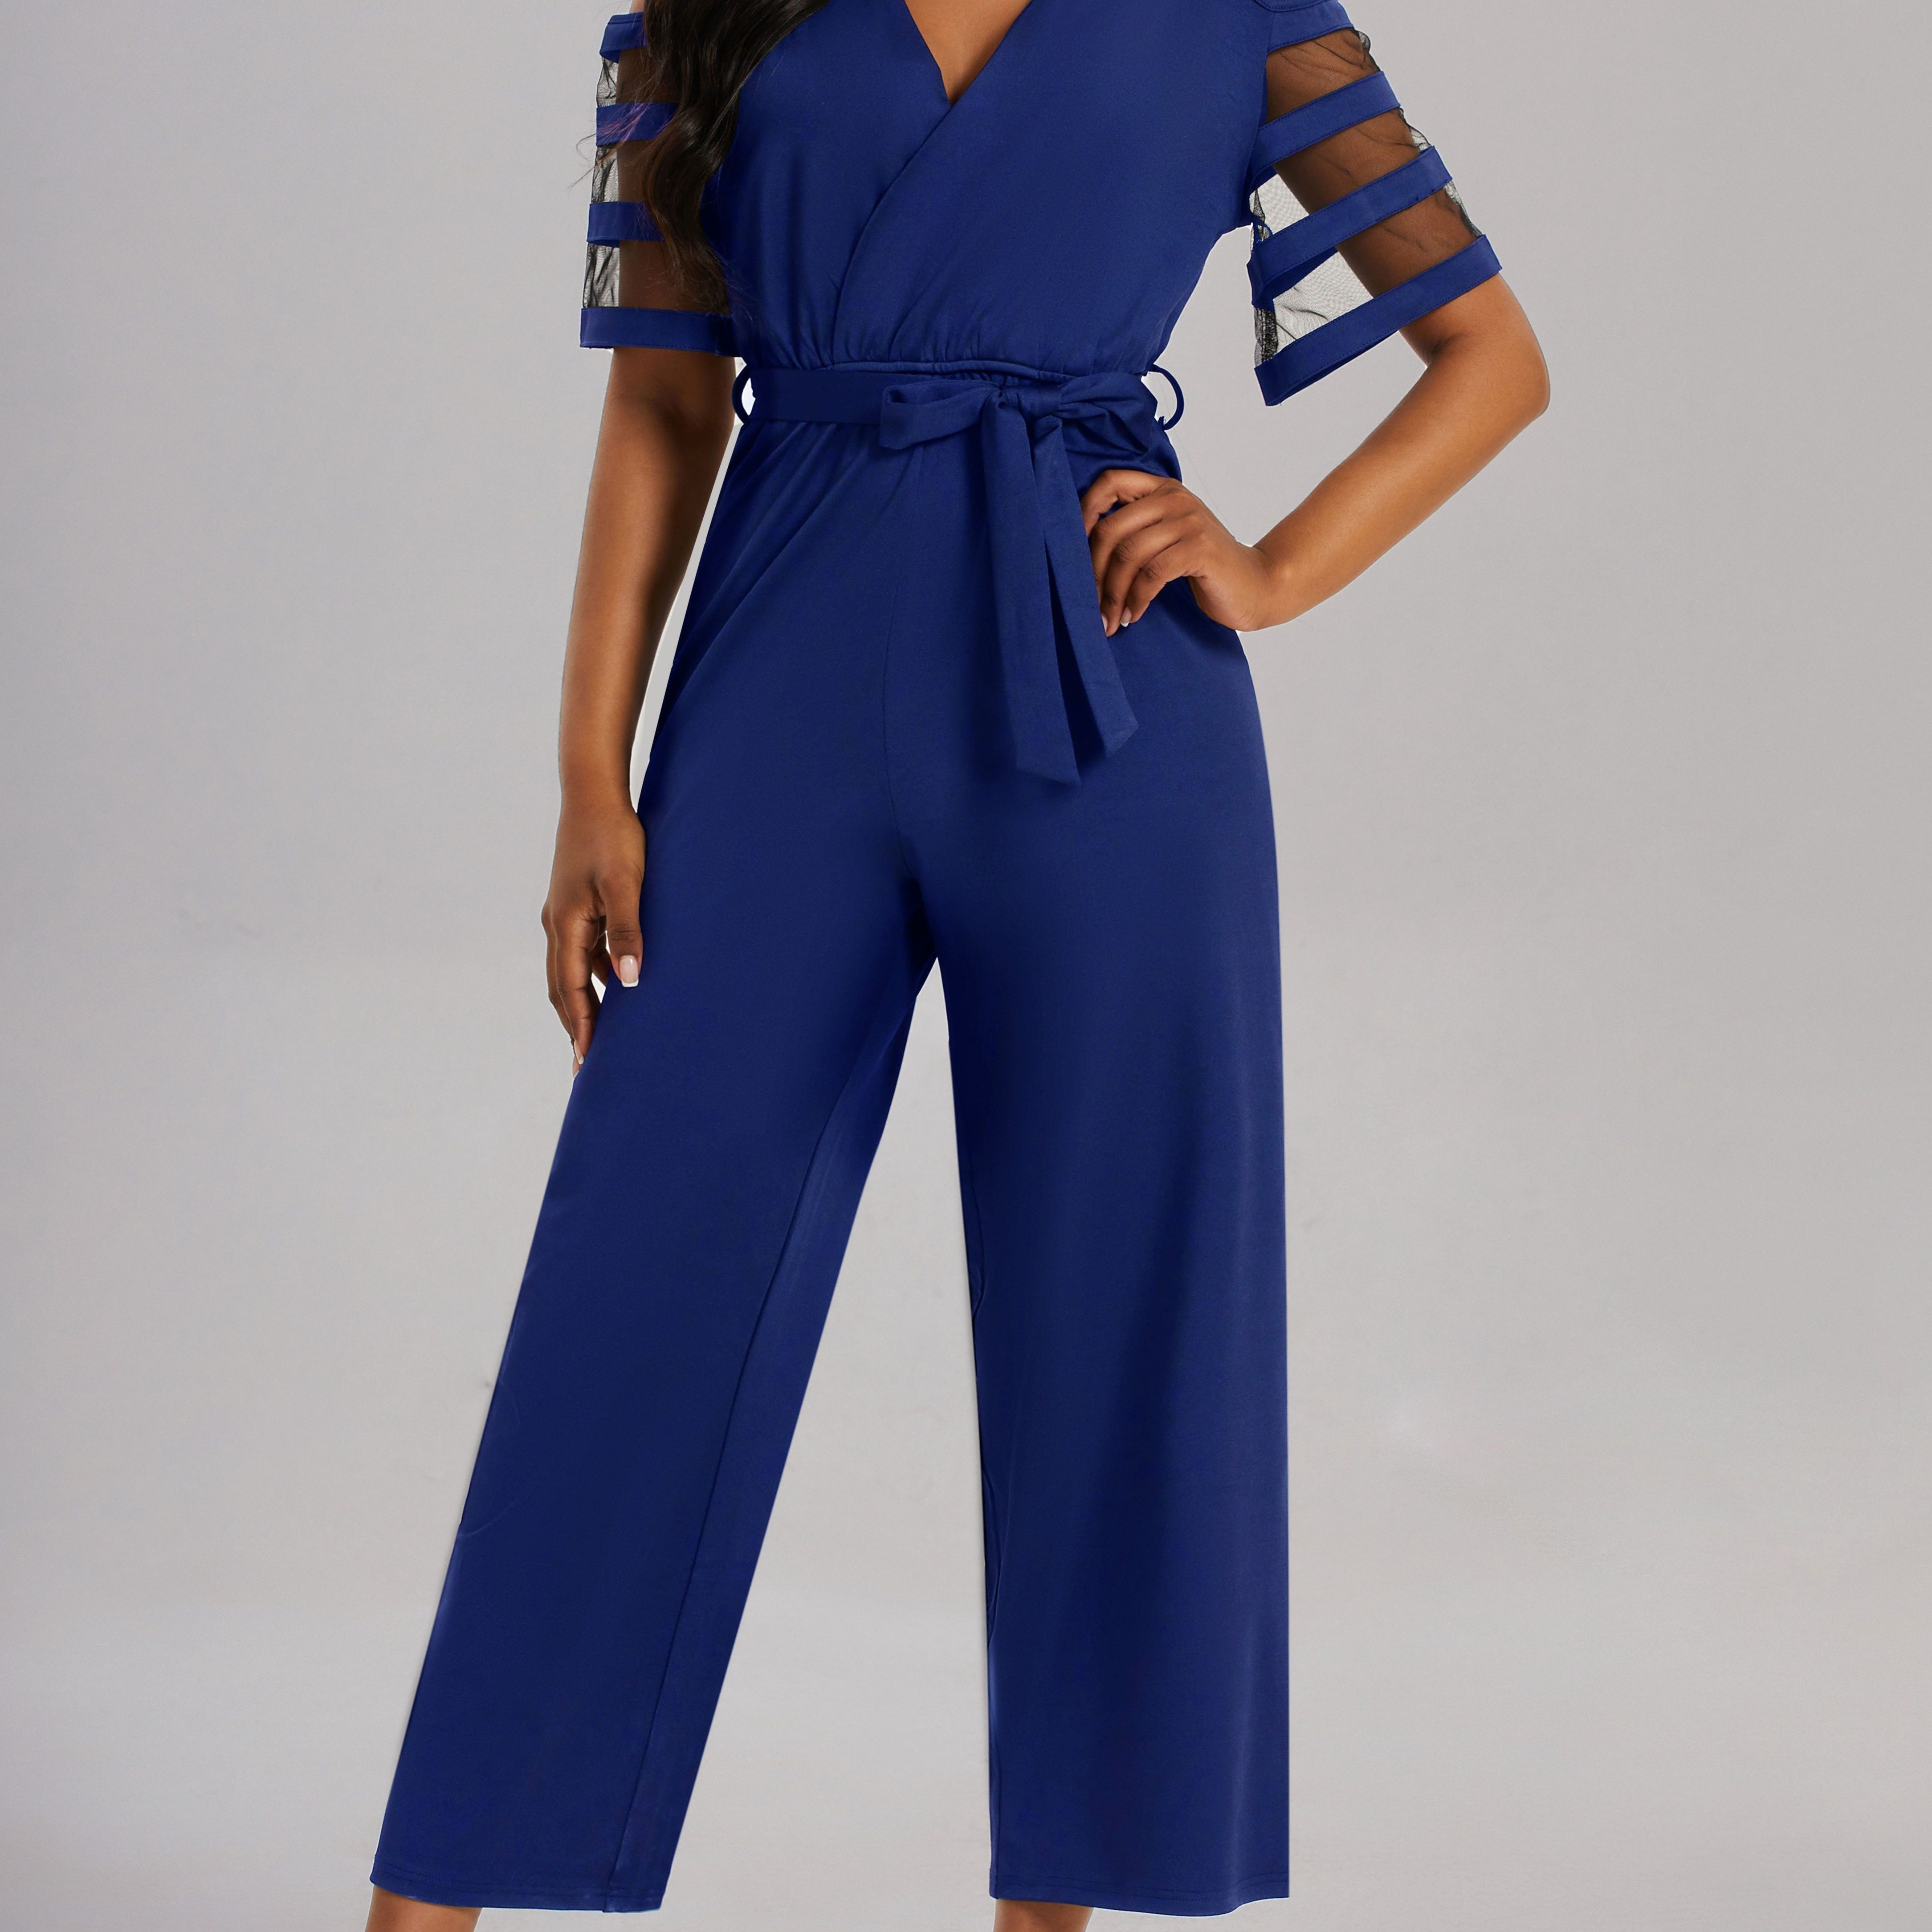 Dropship Solid V Neck Off Shoulder Short Sleeve Knitted Long Straight  Jumpsuit; Elegant Loose Maxi Party Jumpsuit to Sell Online at a Lower Price